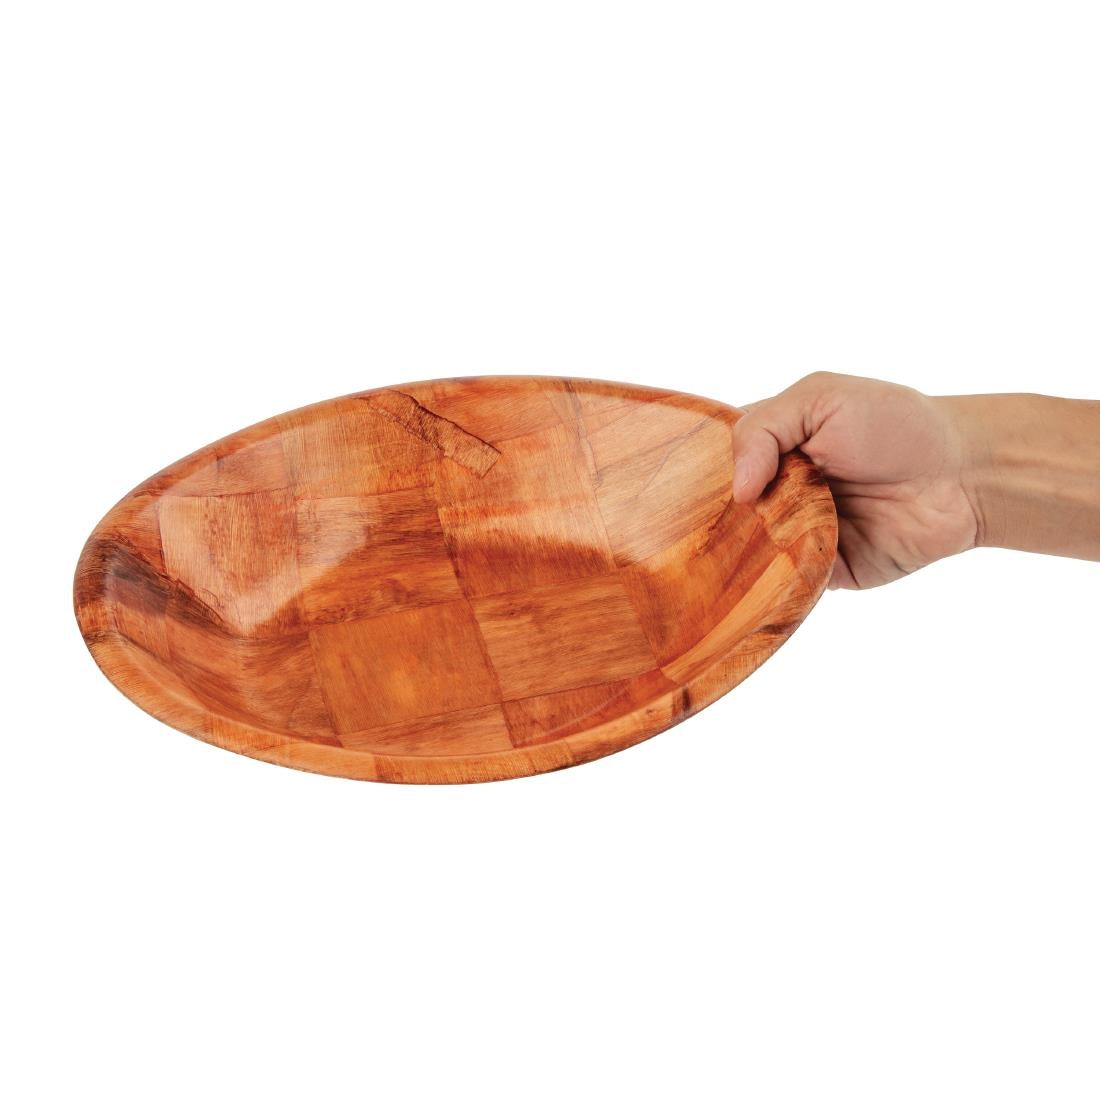 Oval Wooden Bowl Large L093